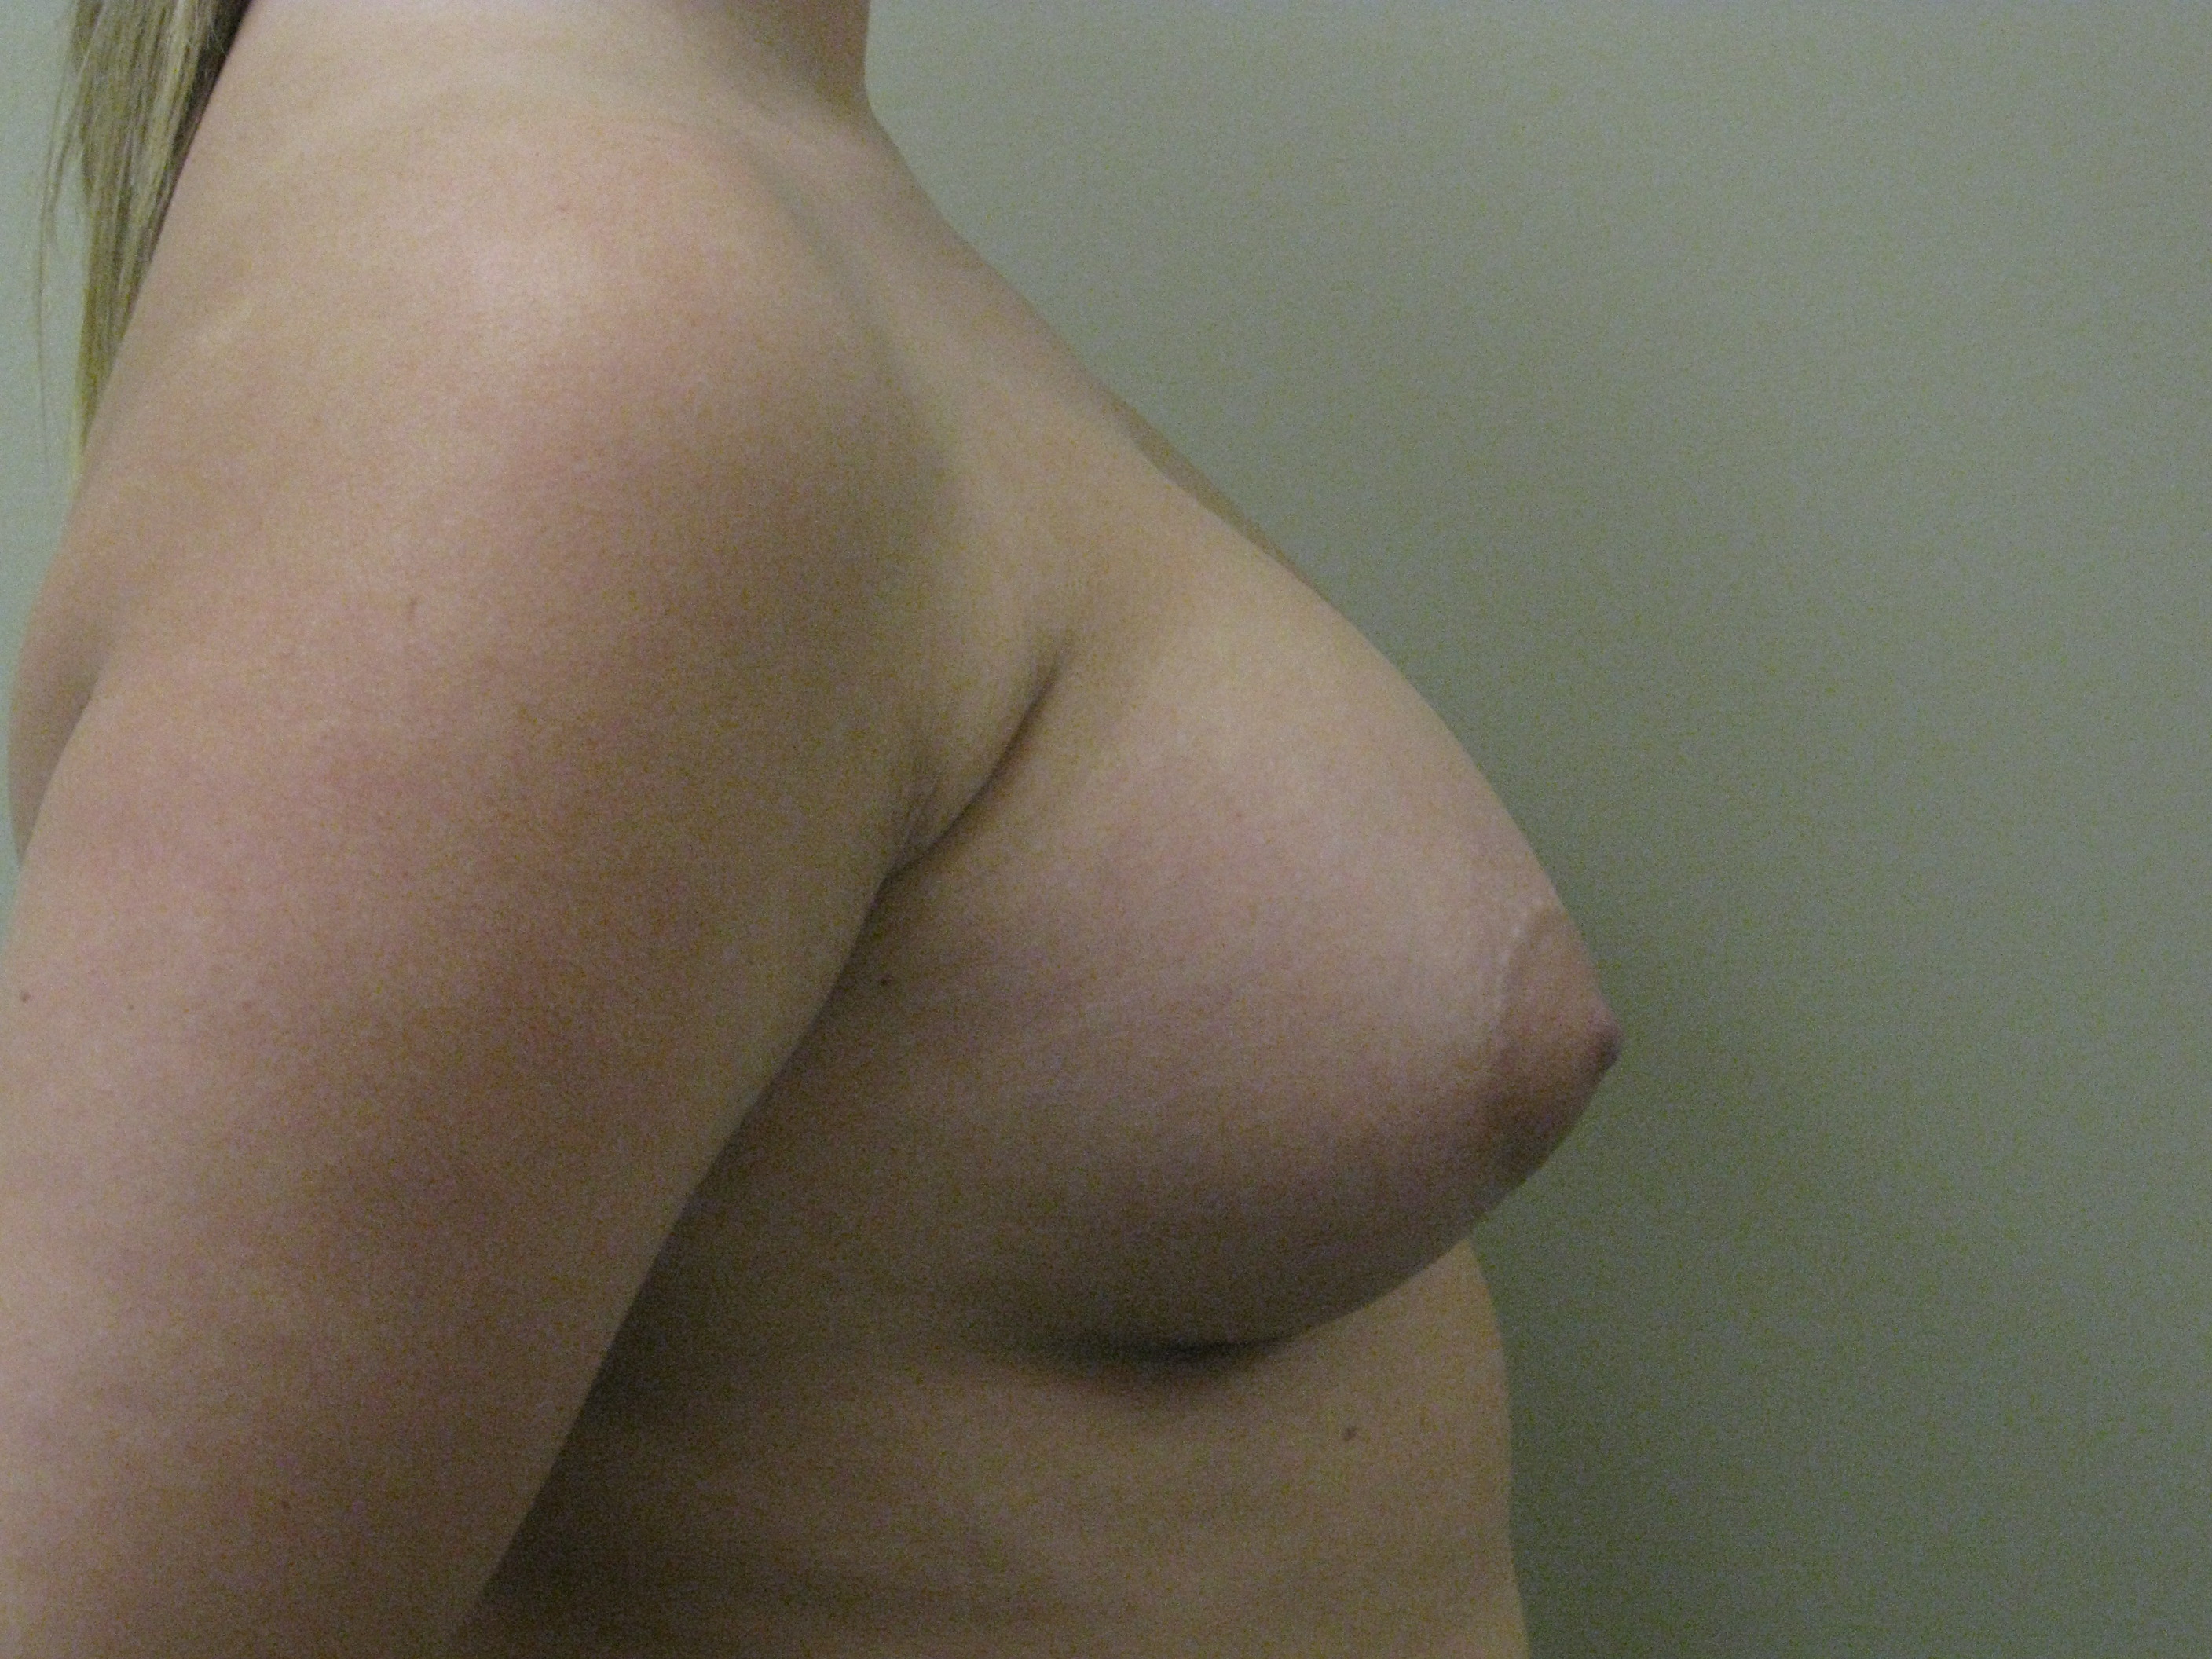 After-Breast Implants